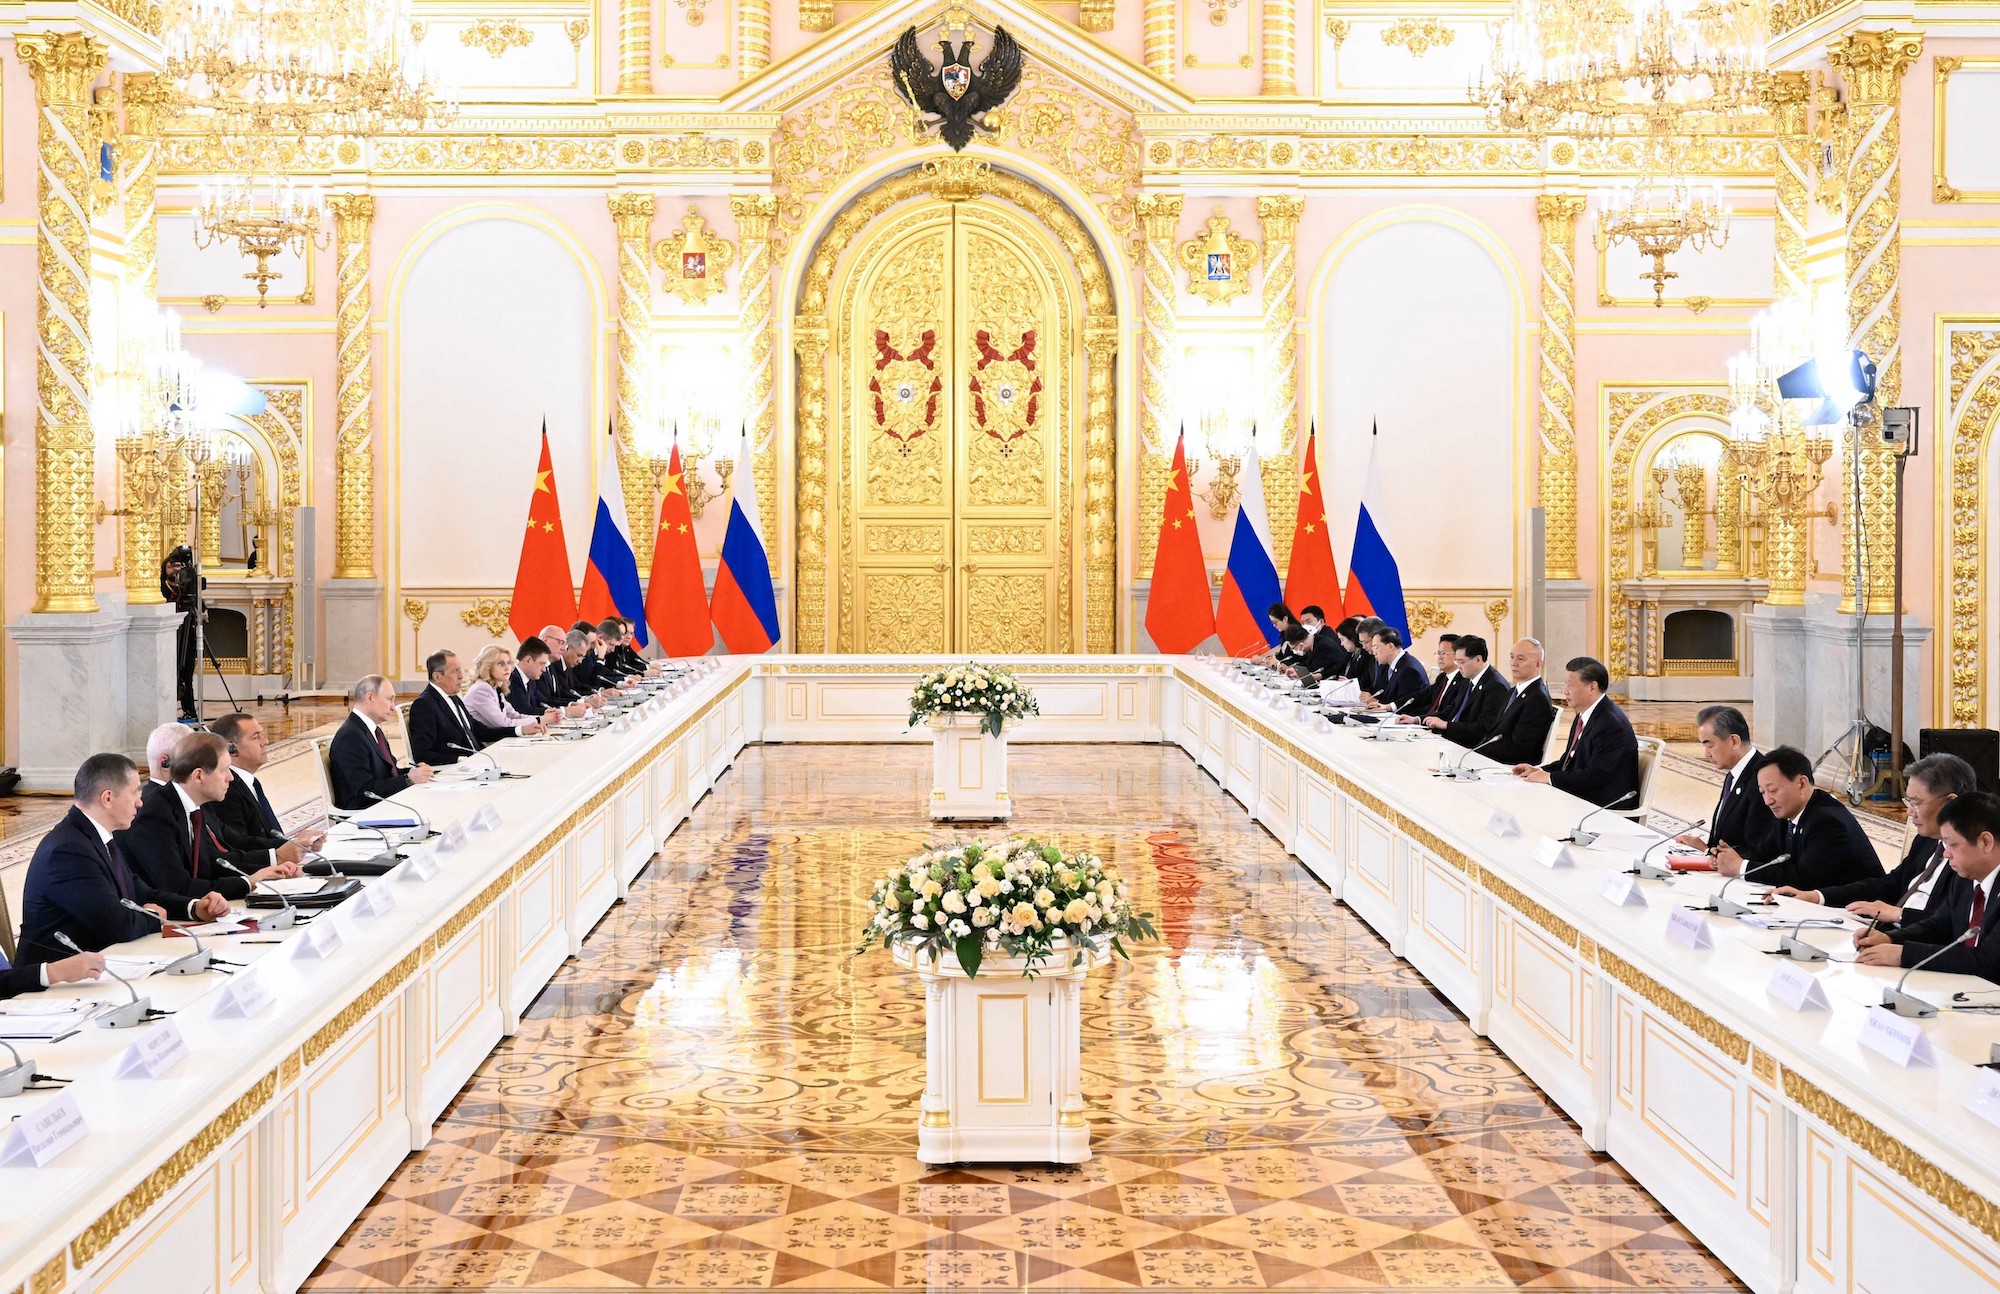 Chinese leader Xi Jinping and Russian President Vladimir Putin hold talks at the Kremlin on Tuesday.